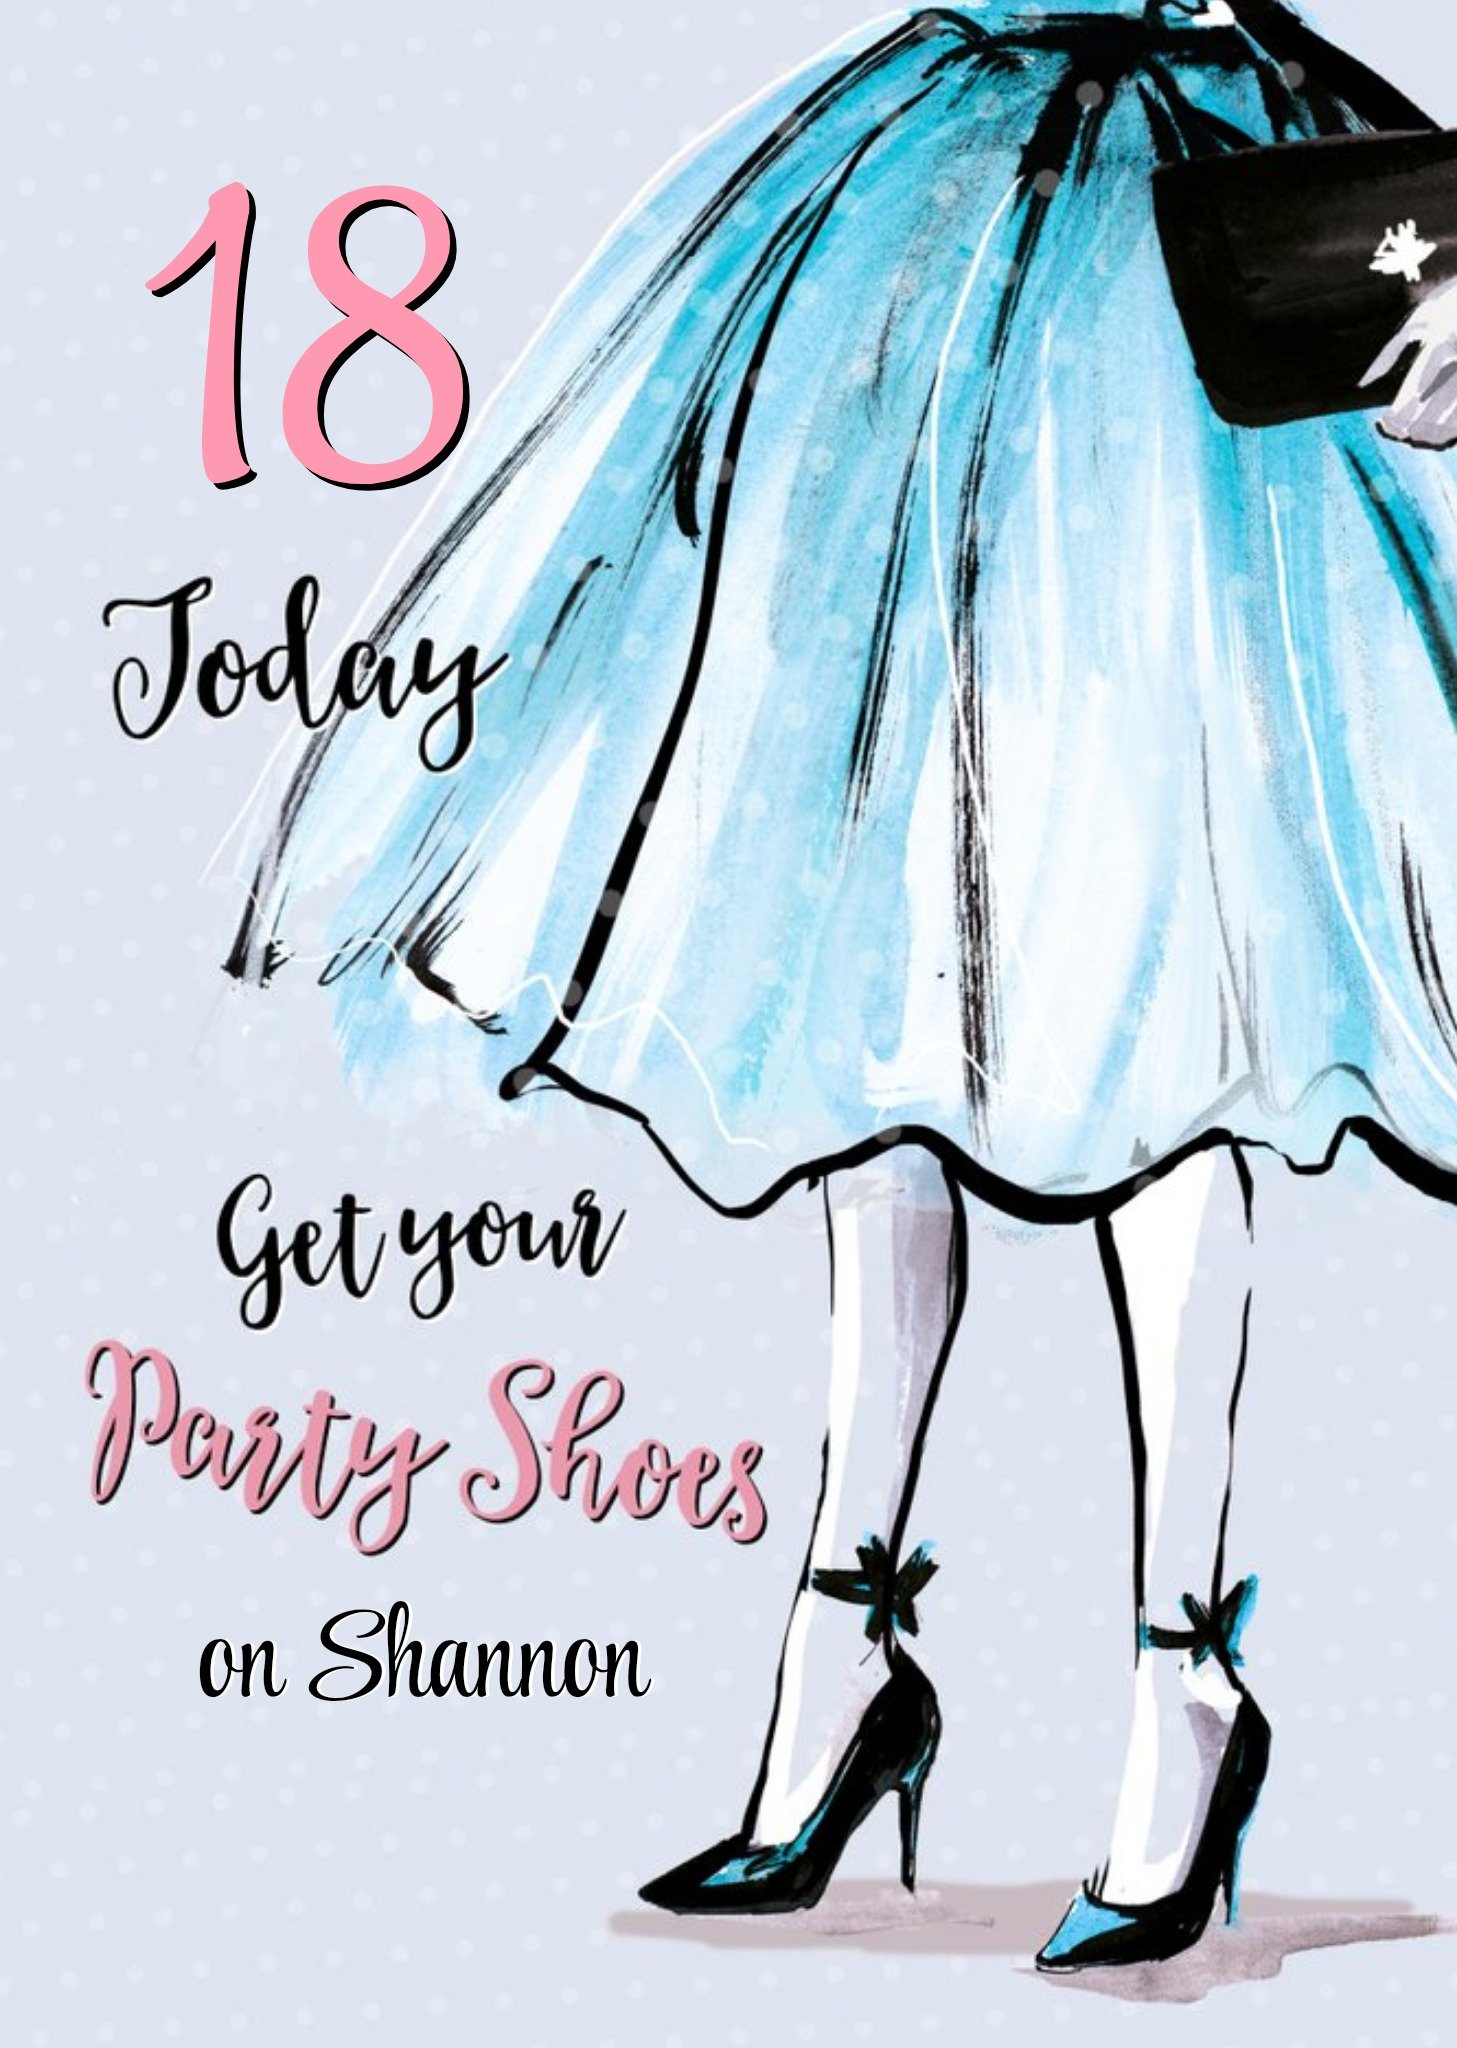 Moonpig Fashion Illustration Birthday Card Get Your Party Shoes On Ecard